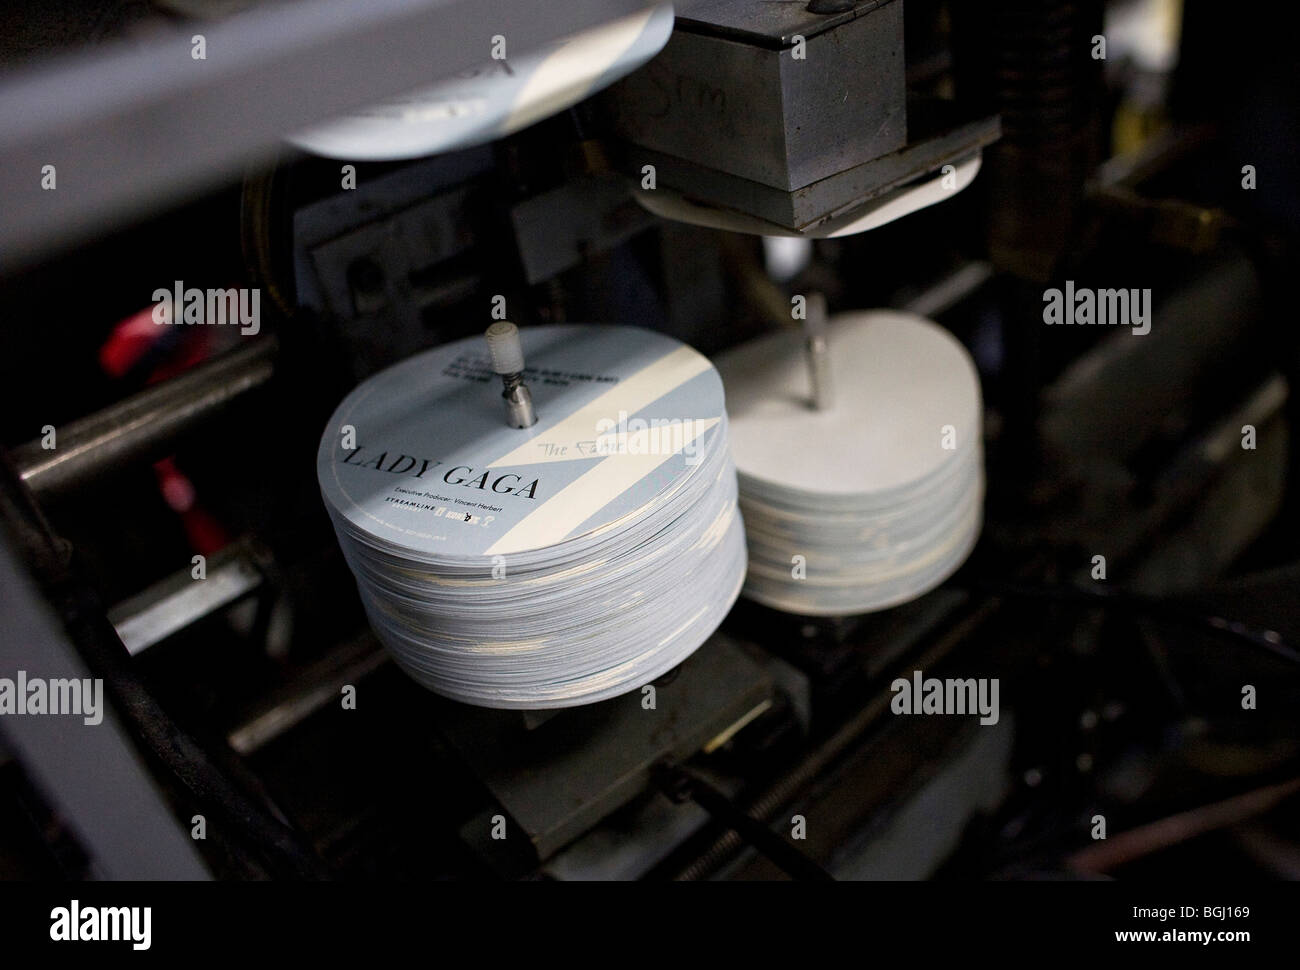 The United Record Pressing plant. Lady Gaga records being pressed. Stock Photo